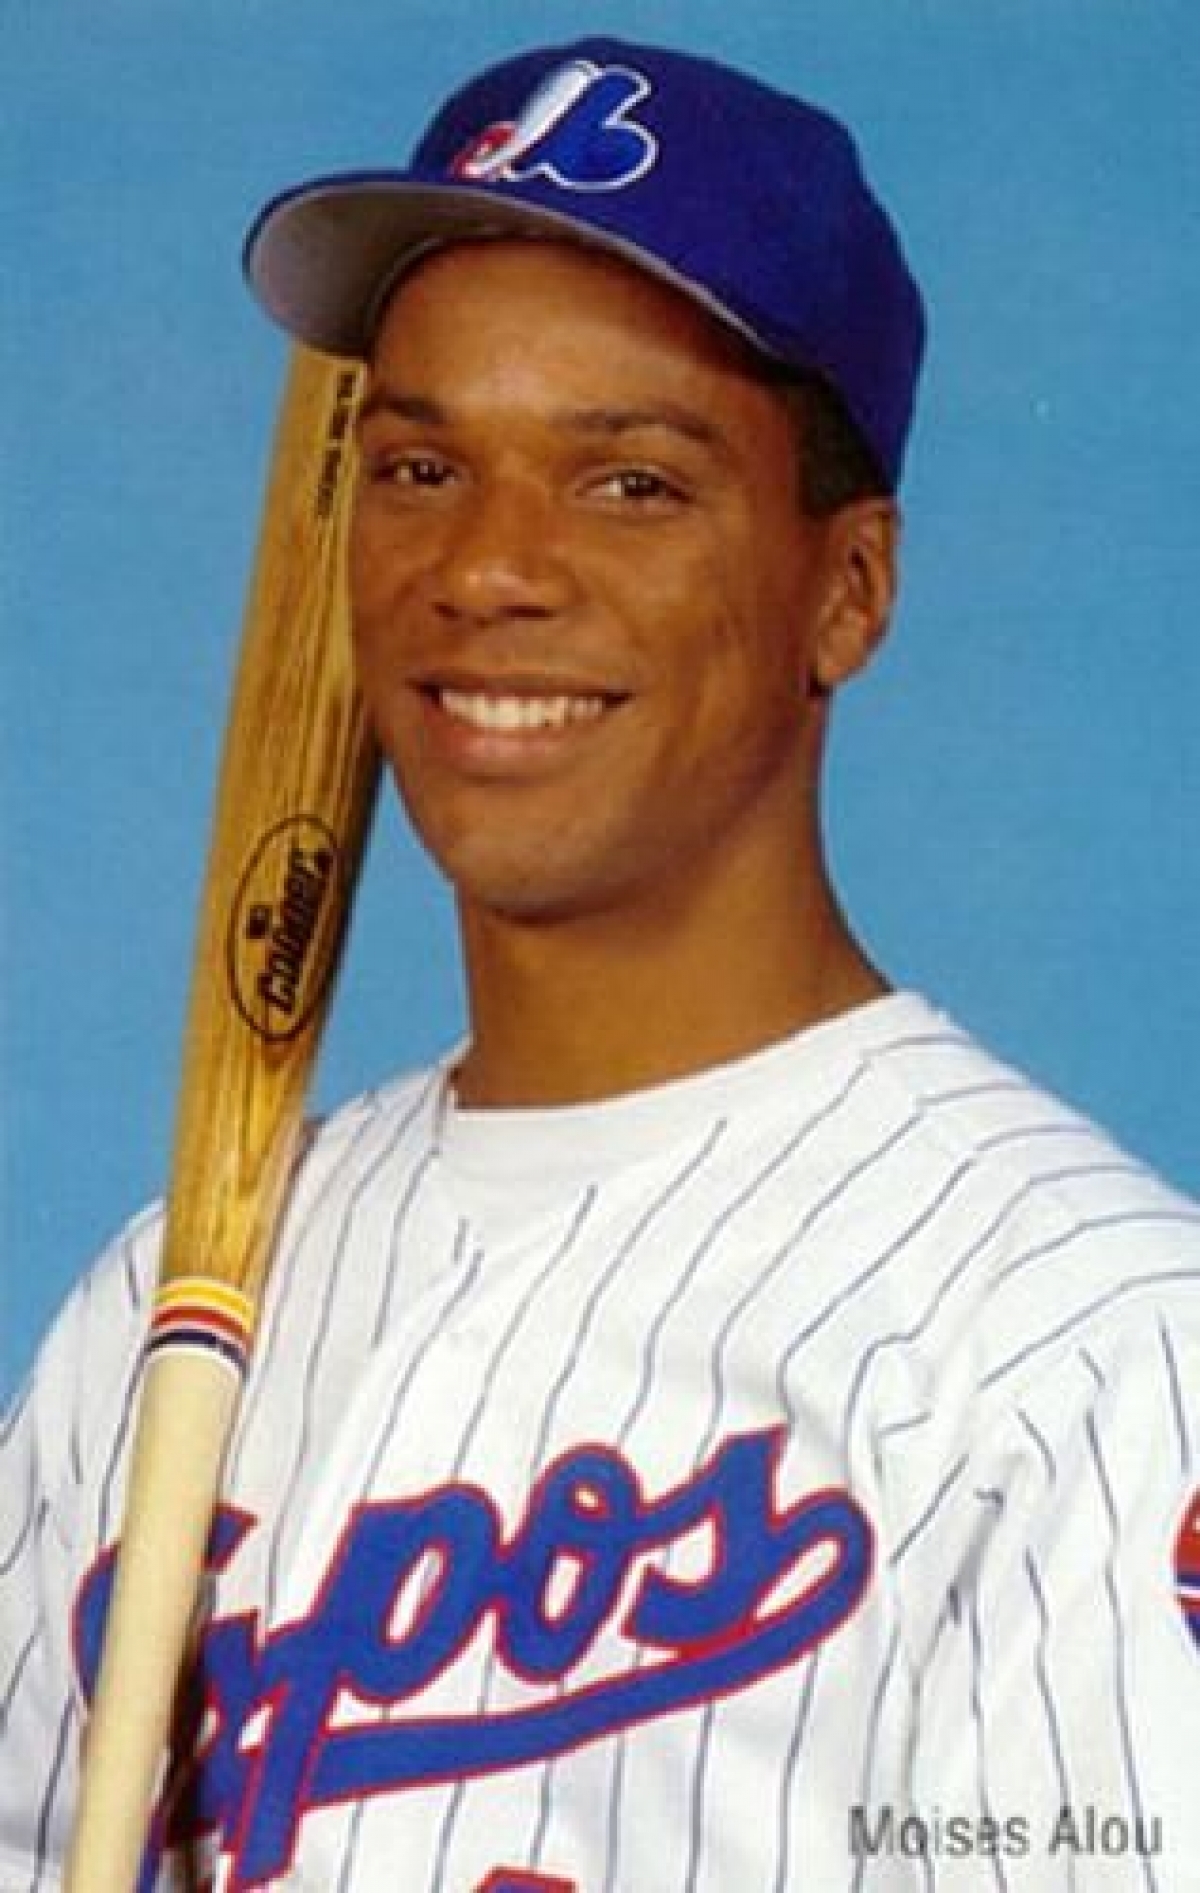 Not in Hall of Fame - 35. Moises Alou